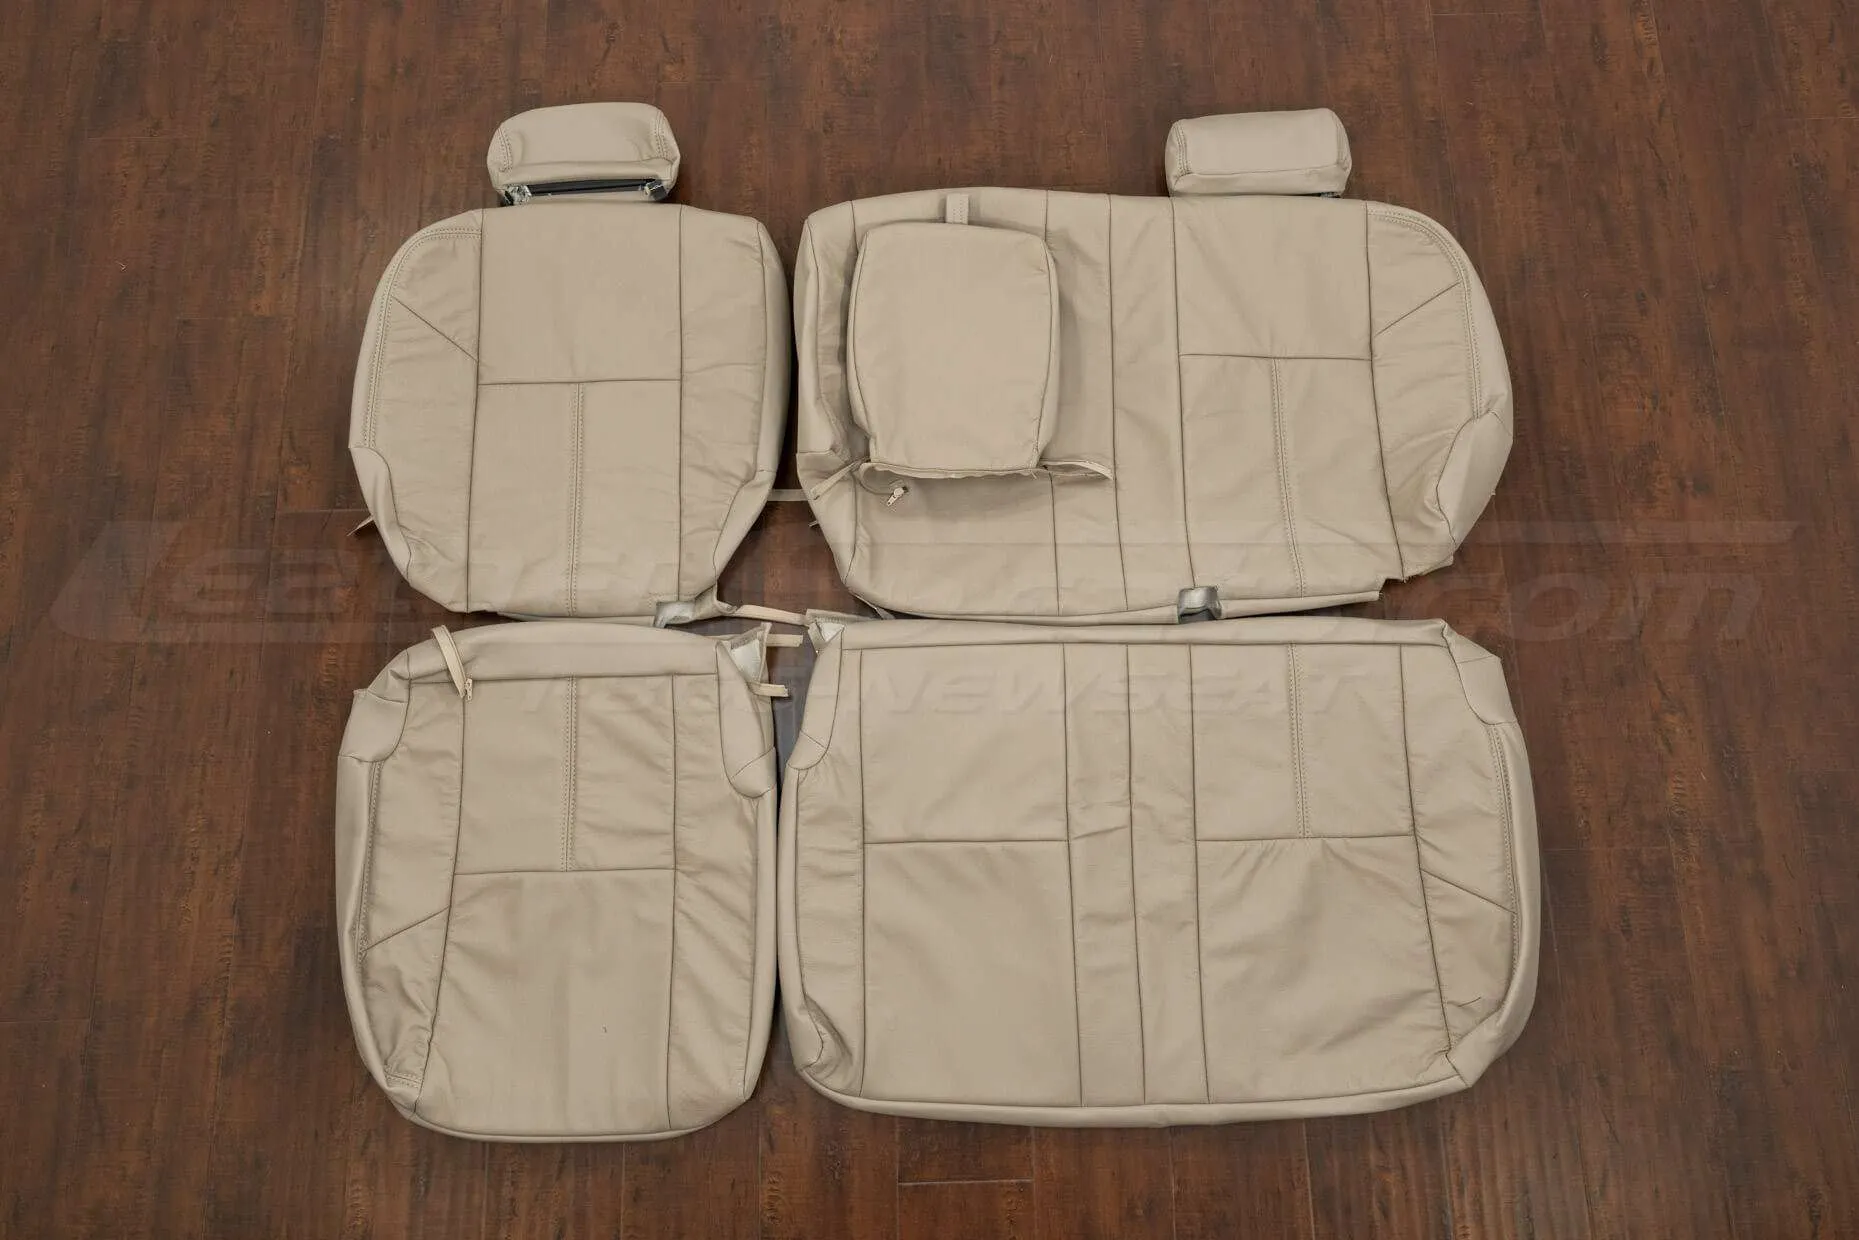 Sandstone Chevrolet Silverado Leather Seat Kit - Rear seat upolstery w/ Armrest